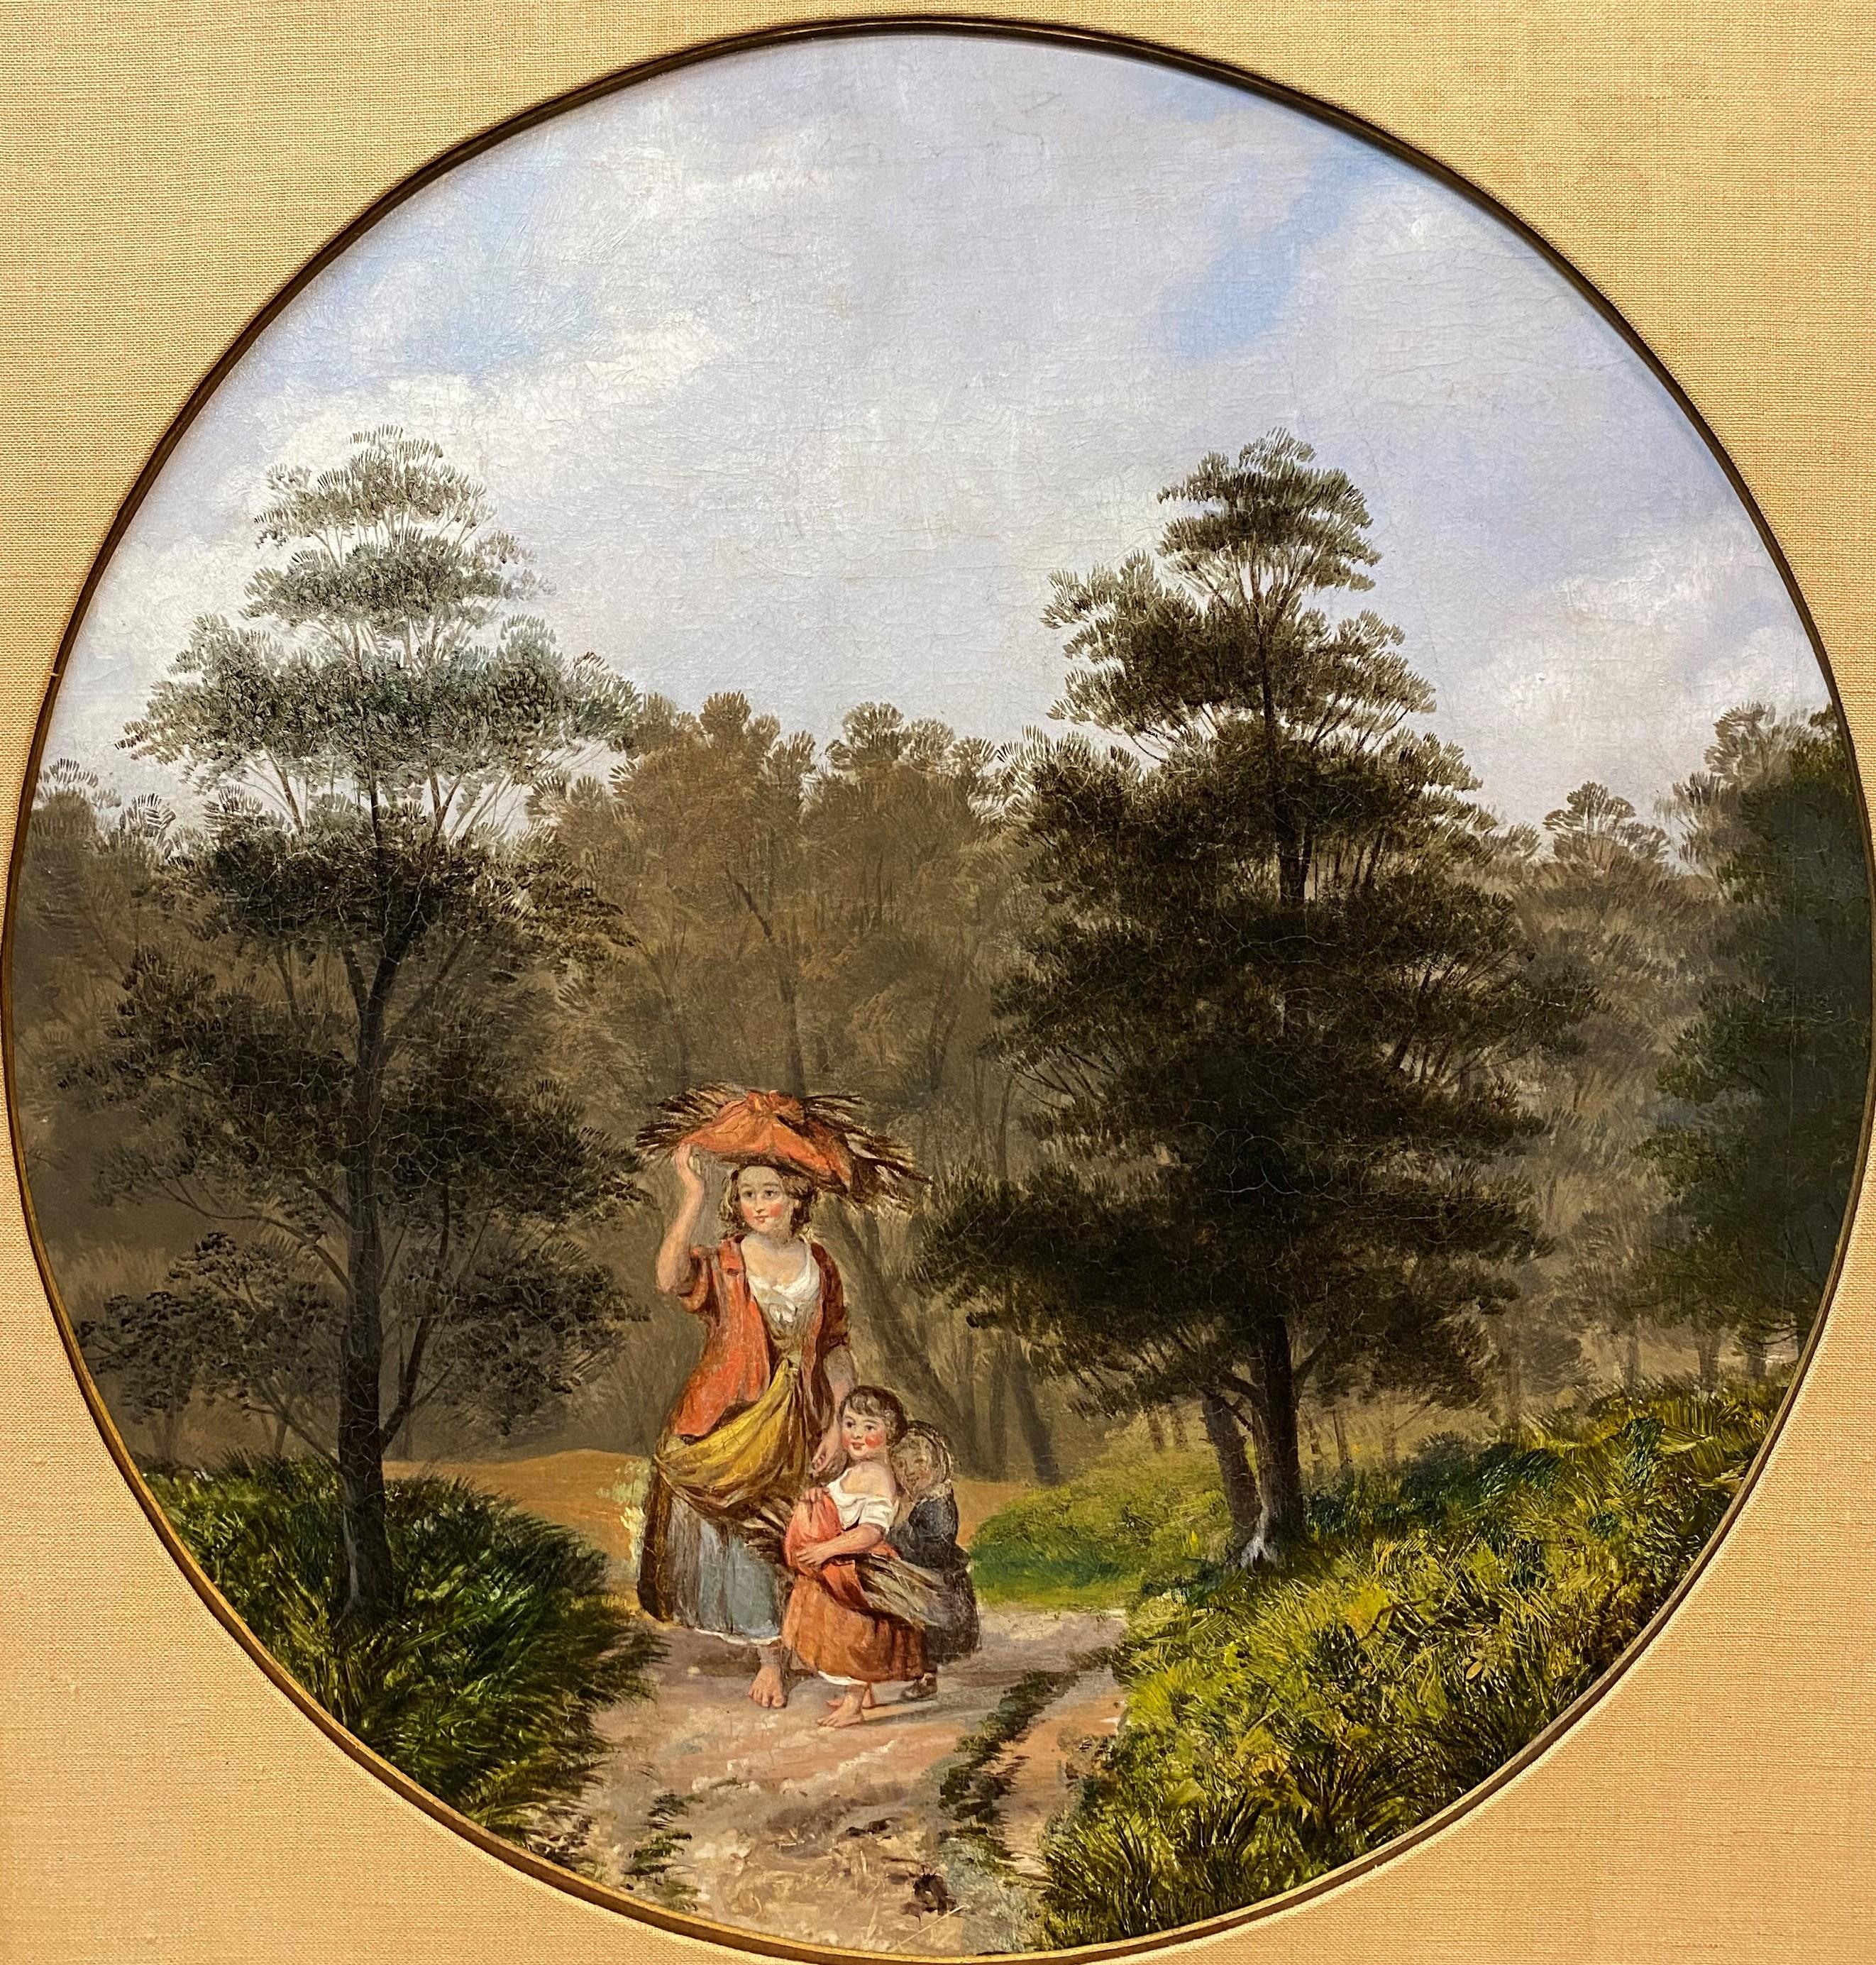 Gathering Kindling on a Country Road - Painting by William Shayer Senior